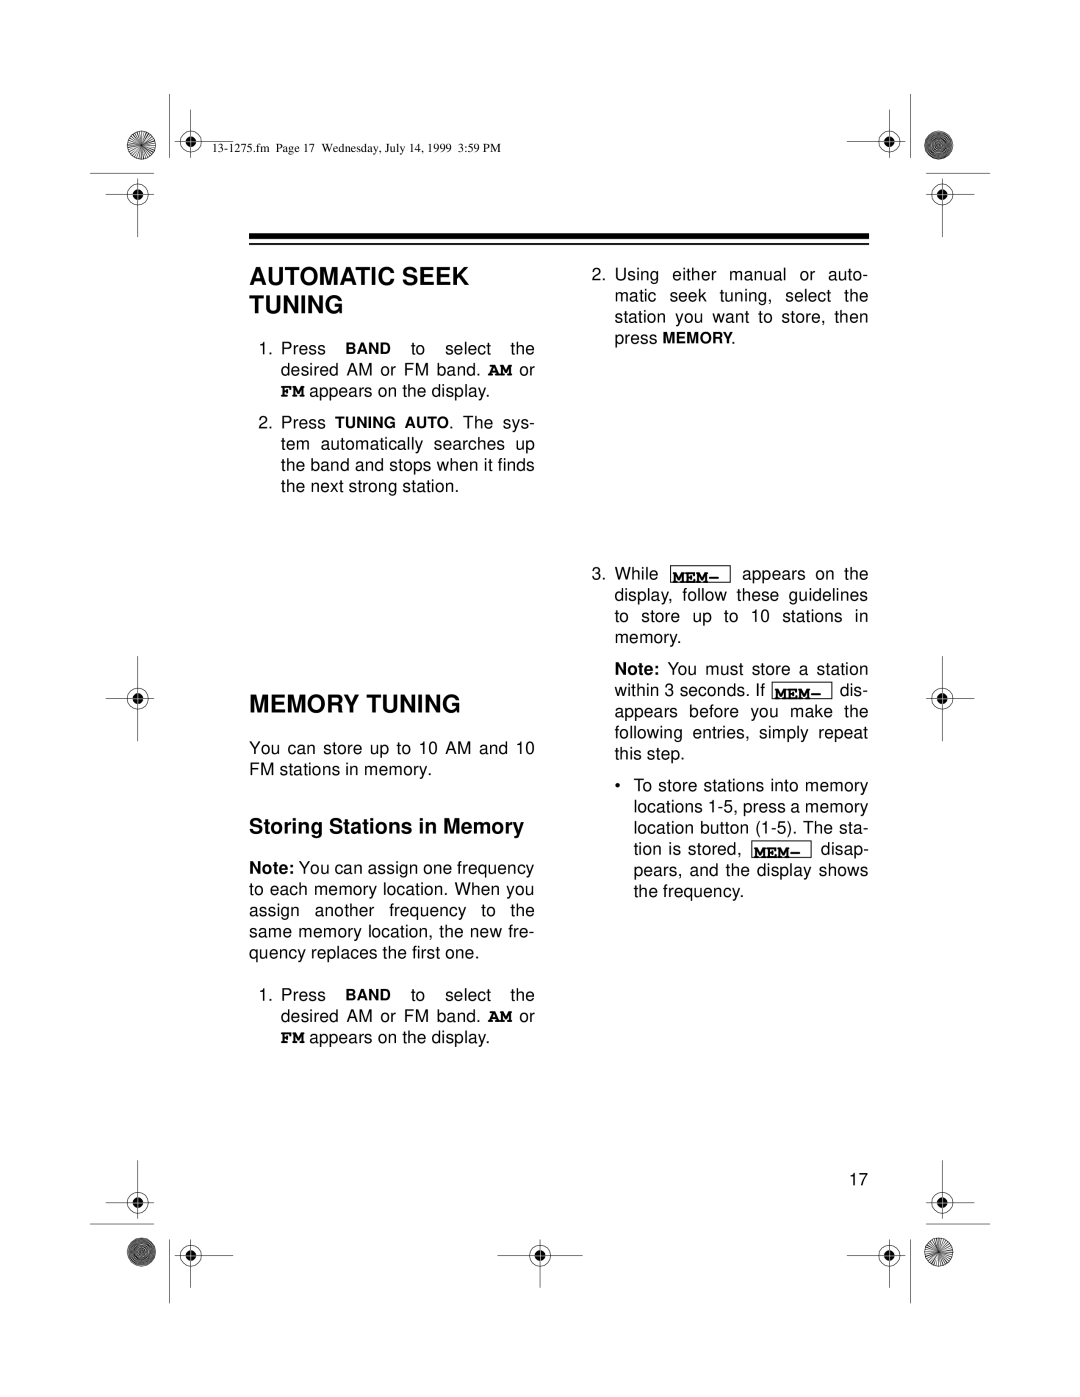 Optimus SYSTEM 728 owner manual Automatic Seek Tuning, Memory Tuning, Storing Stations in Memory 